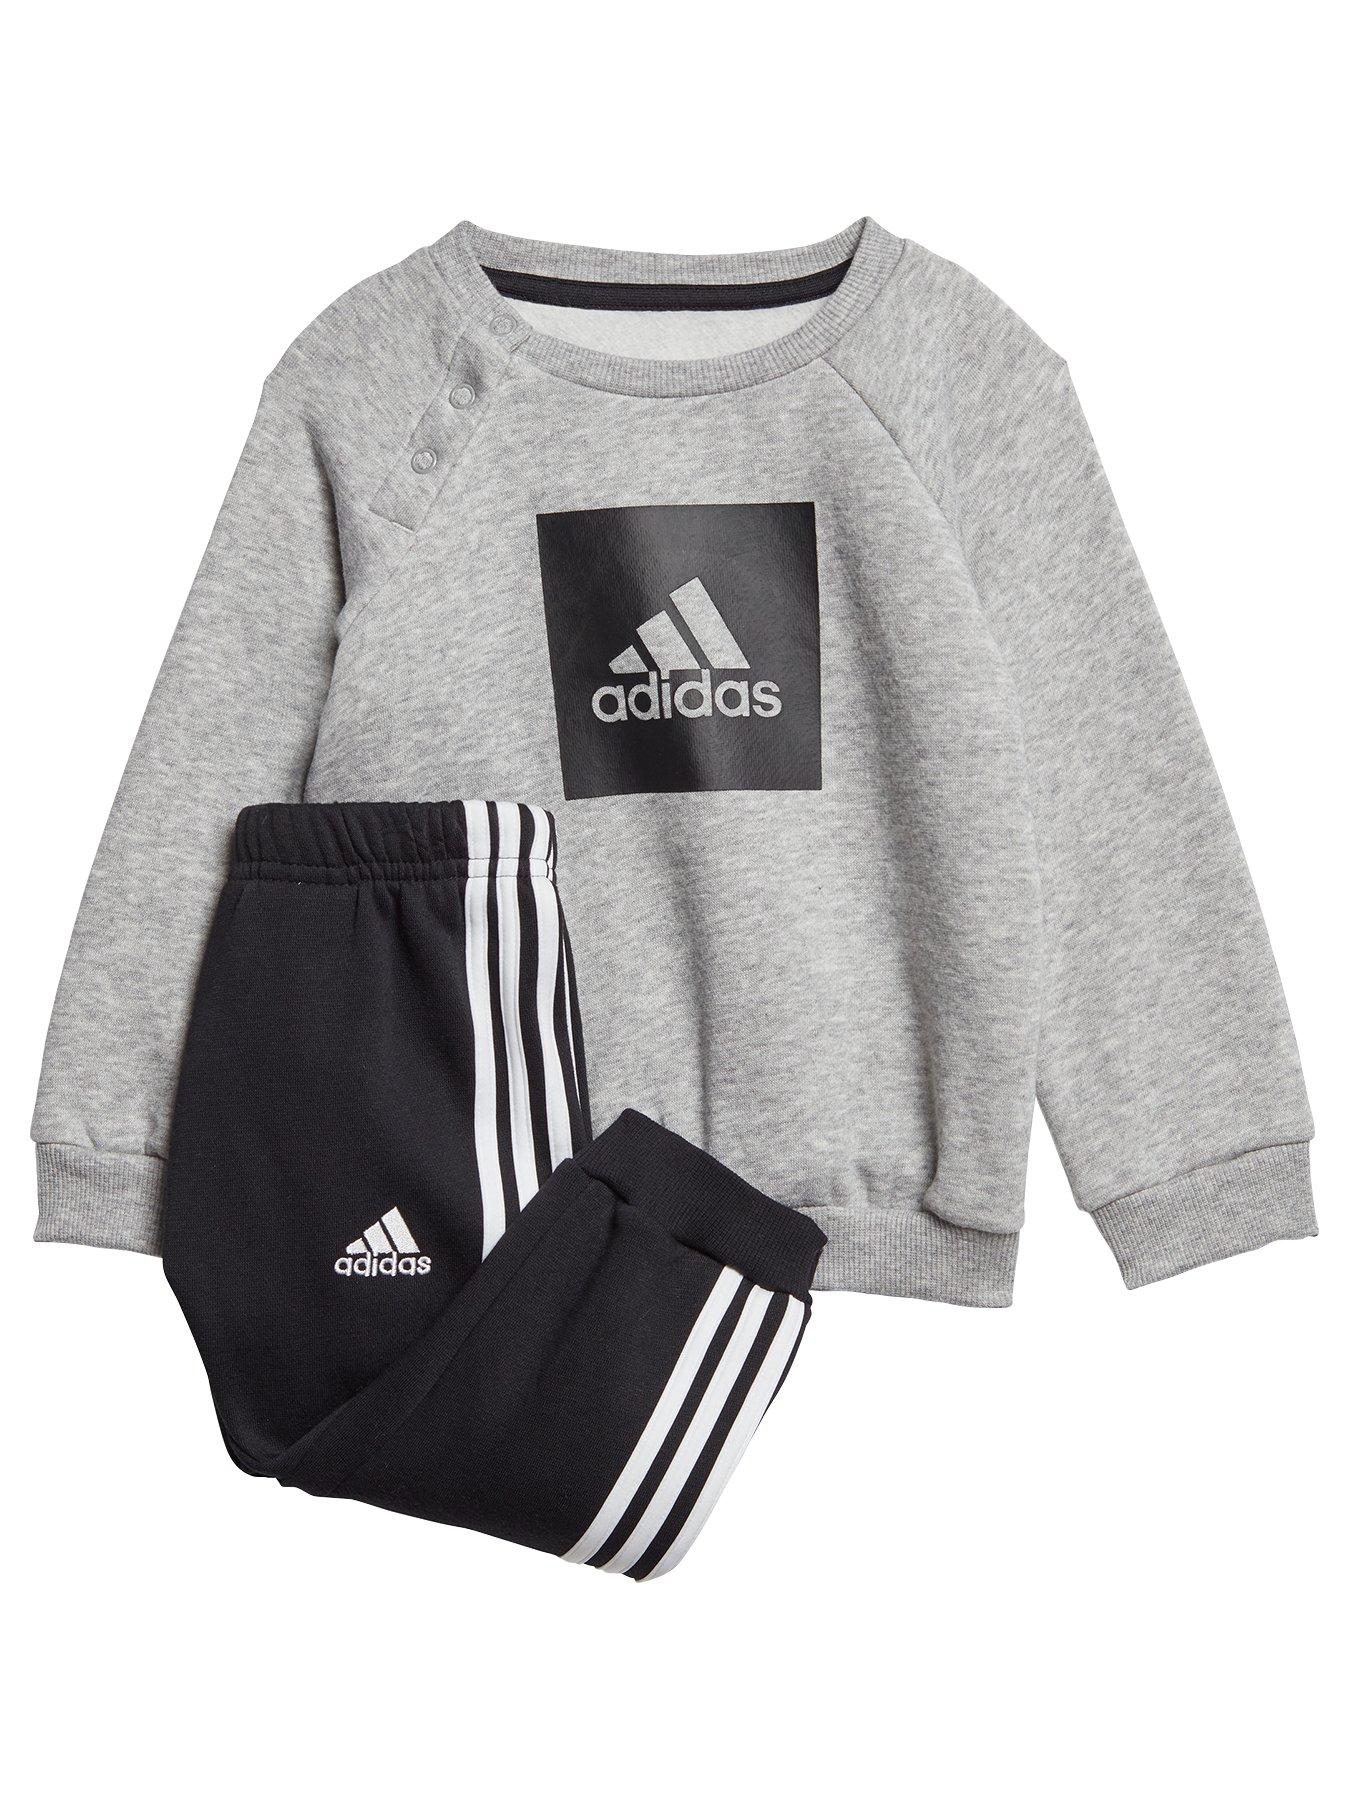 adidas 0 6 months costumes